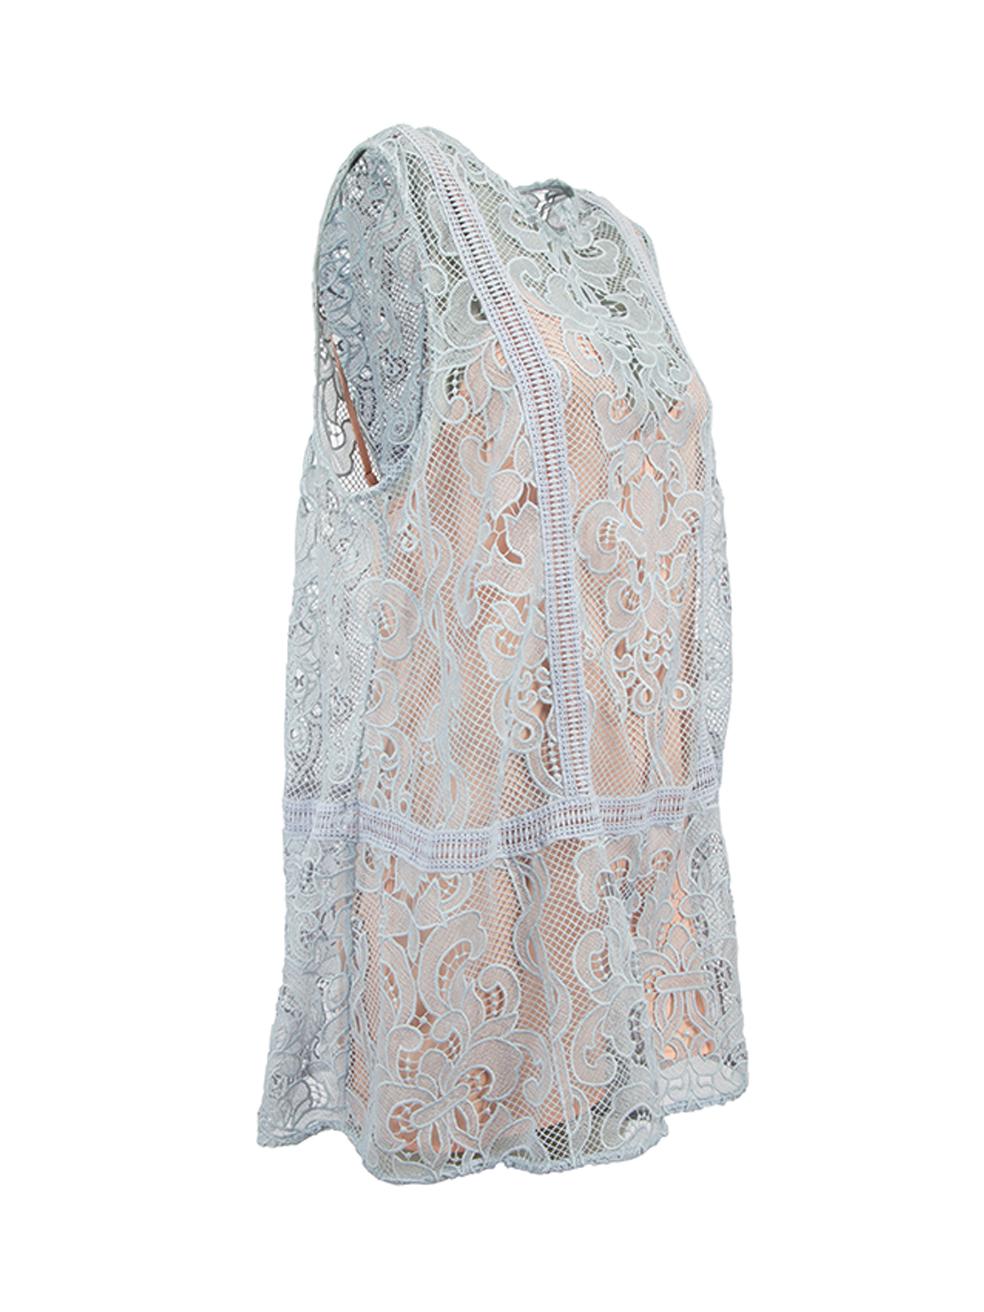 CONDITION is Very good. Hardly any visible wear to playsuit is evident on this used Alice McCall designer resale item. 



Details


Blue lace with a pink vest under layer 

Lace and polyester

Sleeveless playsuit

Loose fit

Round neckline

Open